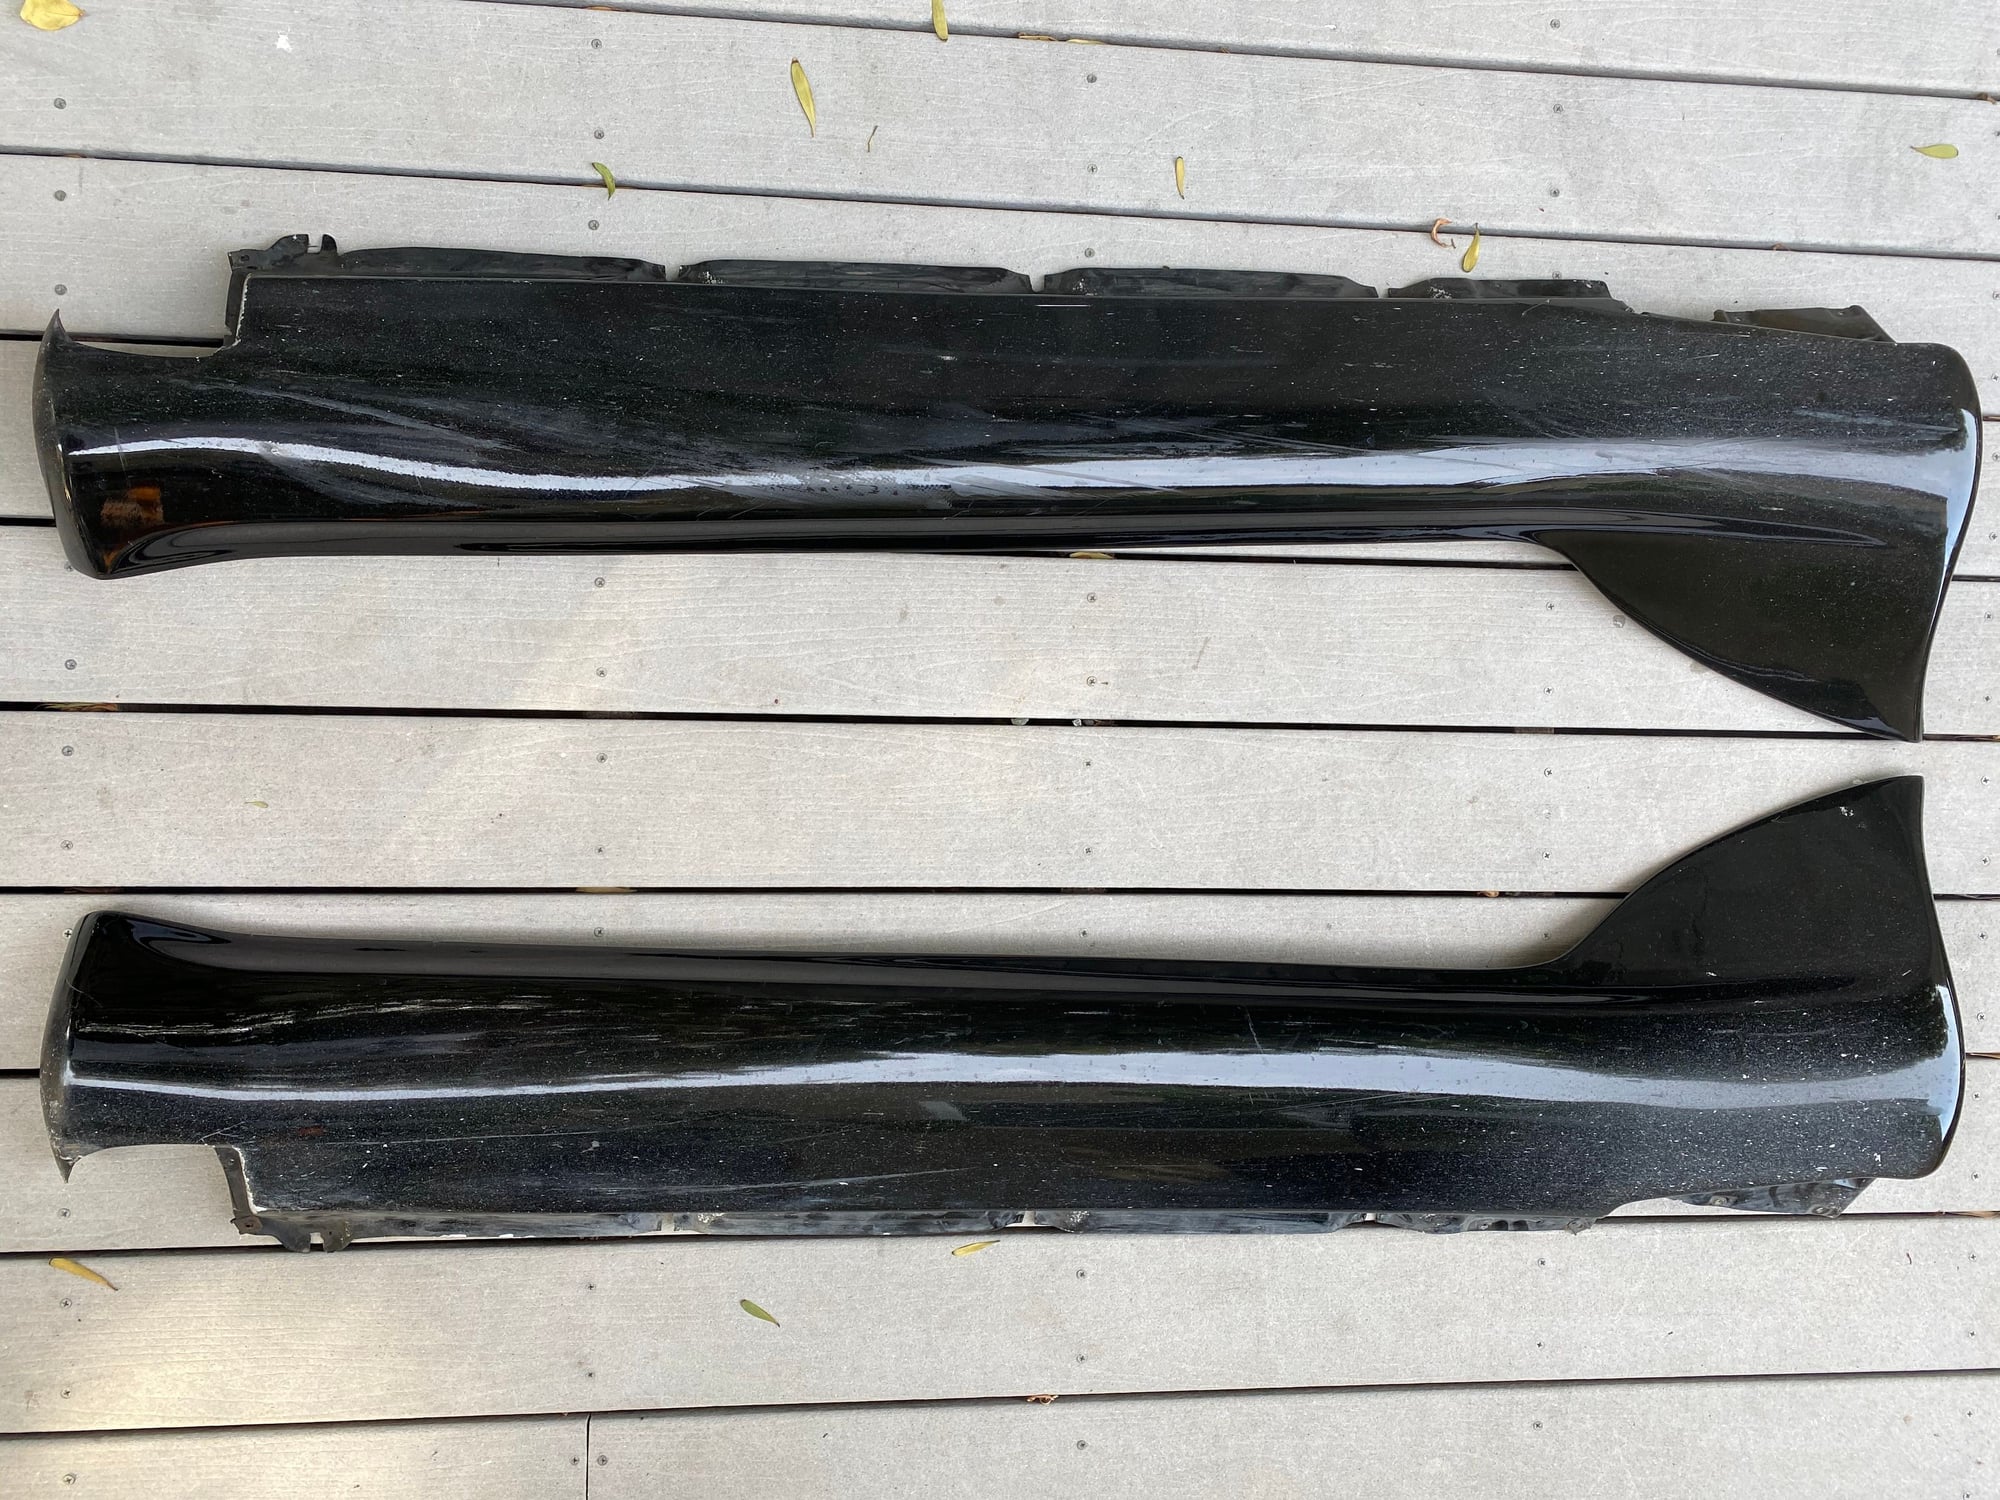 Exterior Body Parts - RS style 993 side skirts - Used - Los Angeles, CA 90026, United States